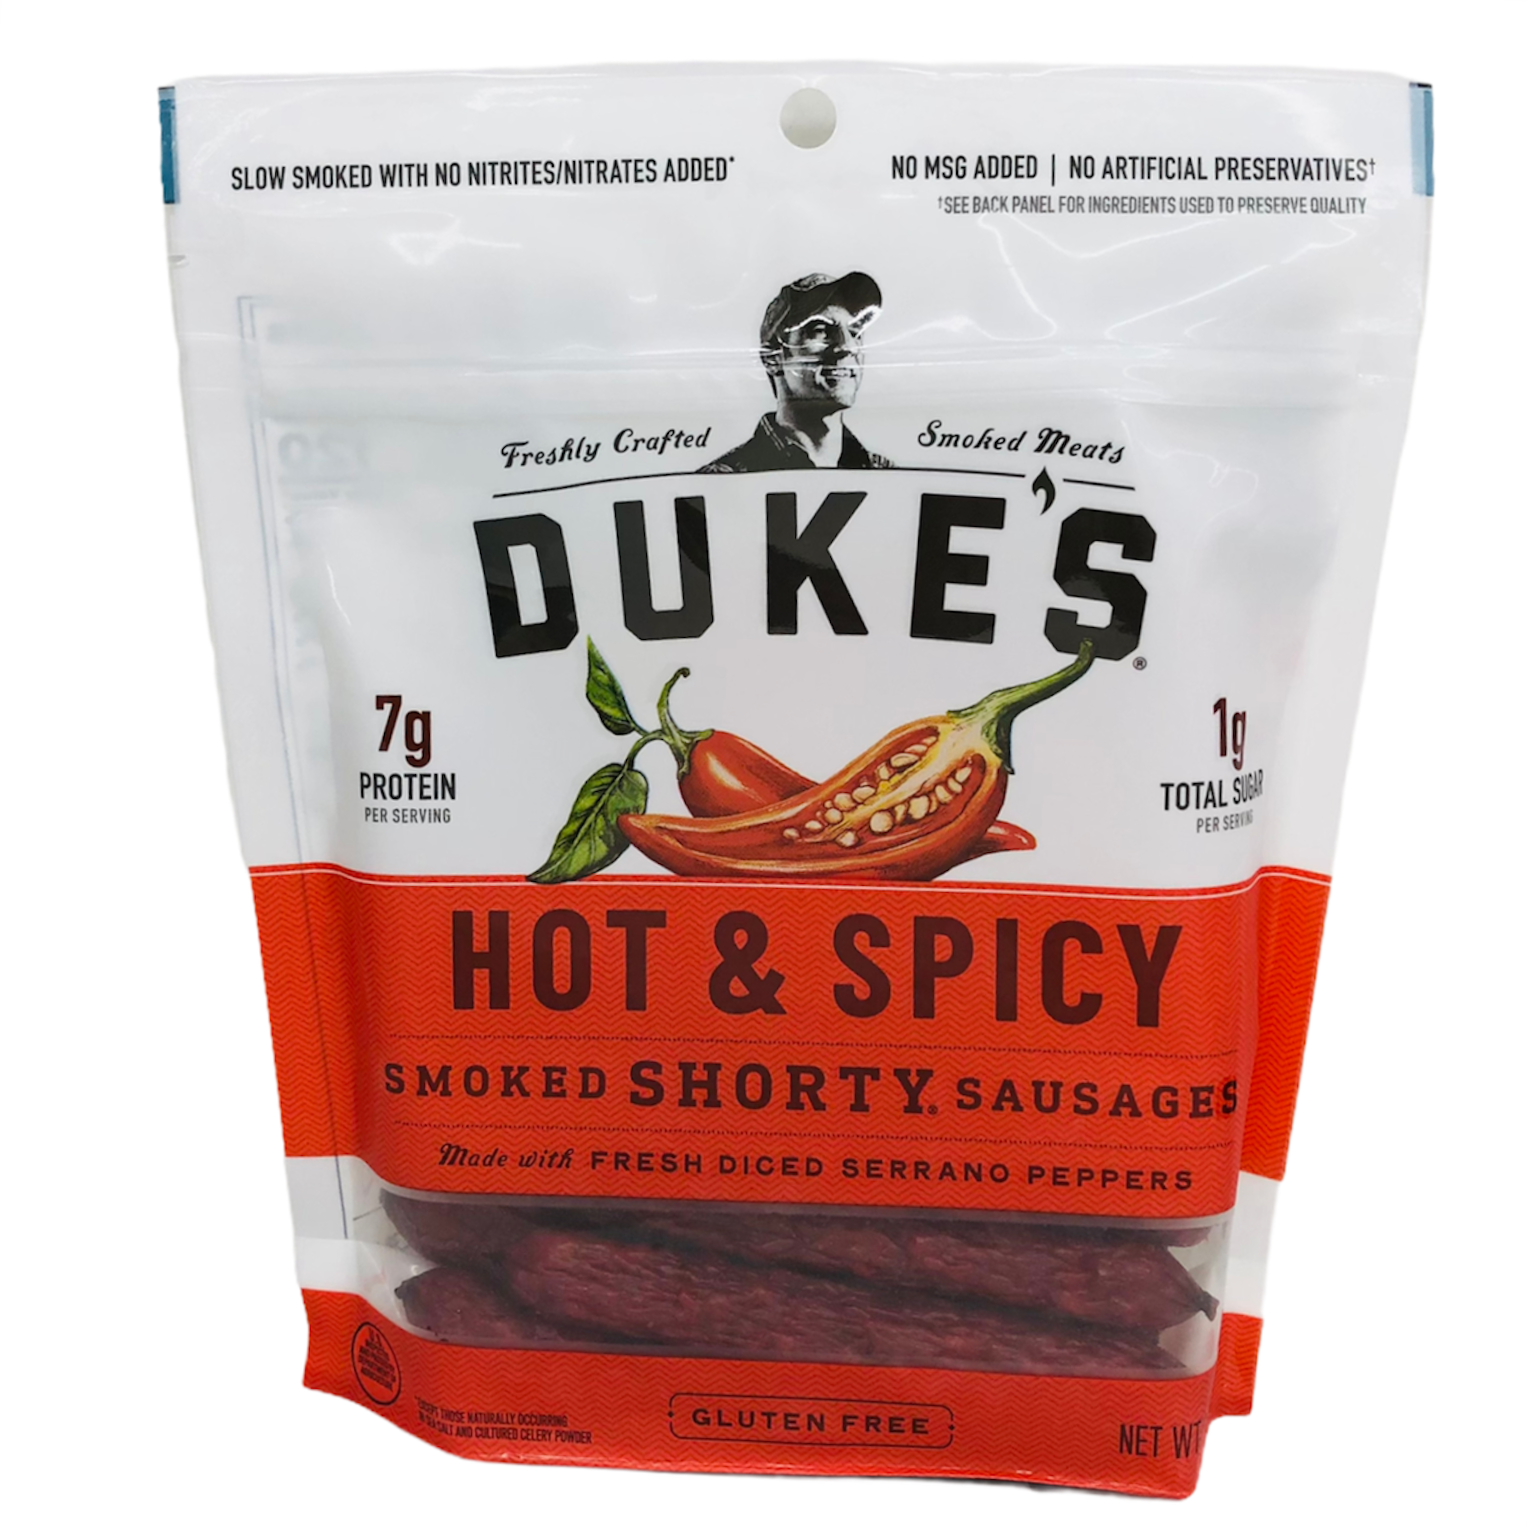 Duke's Hot & Spicy Smoked Shorty Sausages 5 oz Dukes